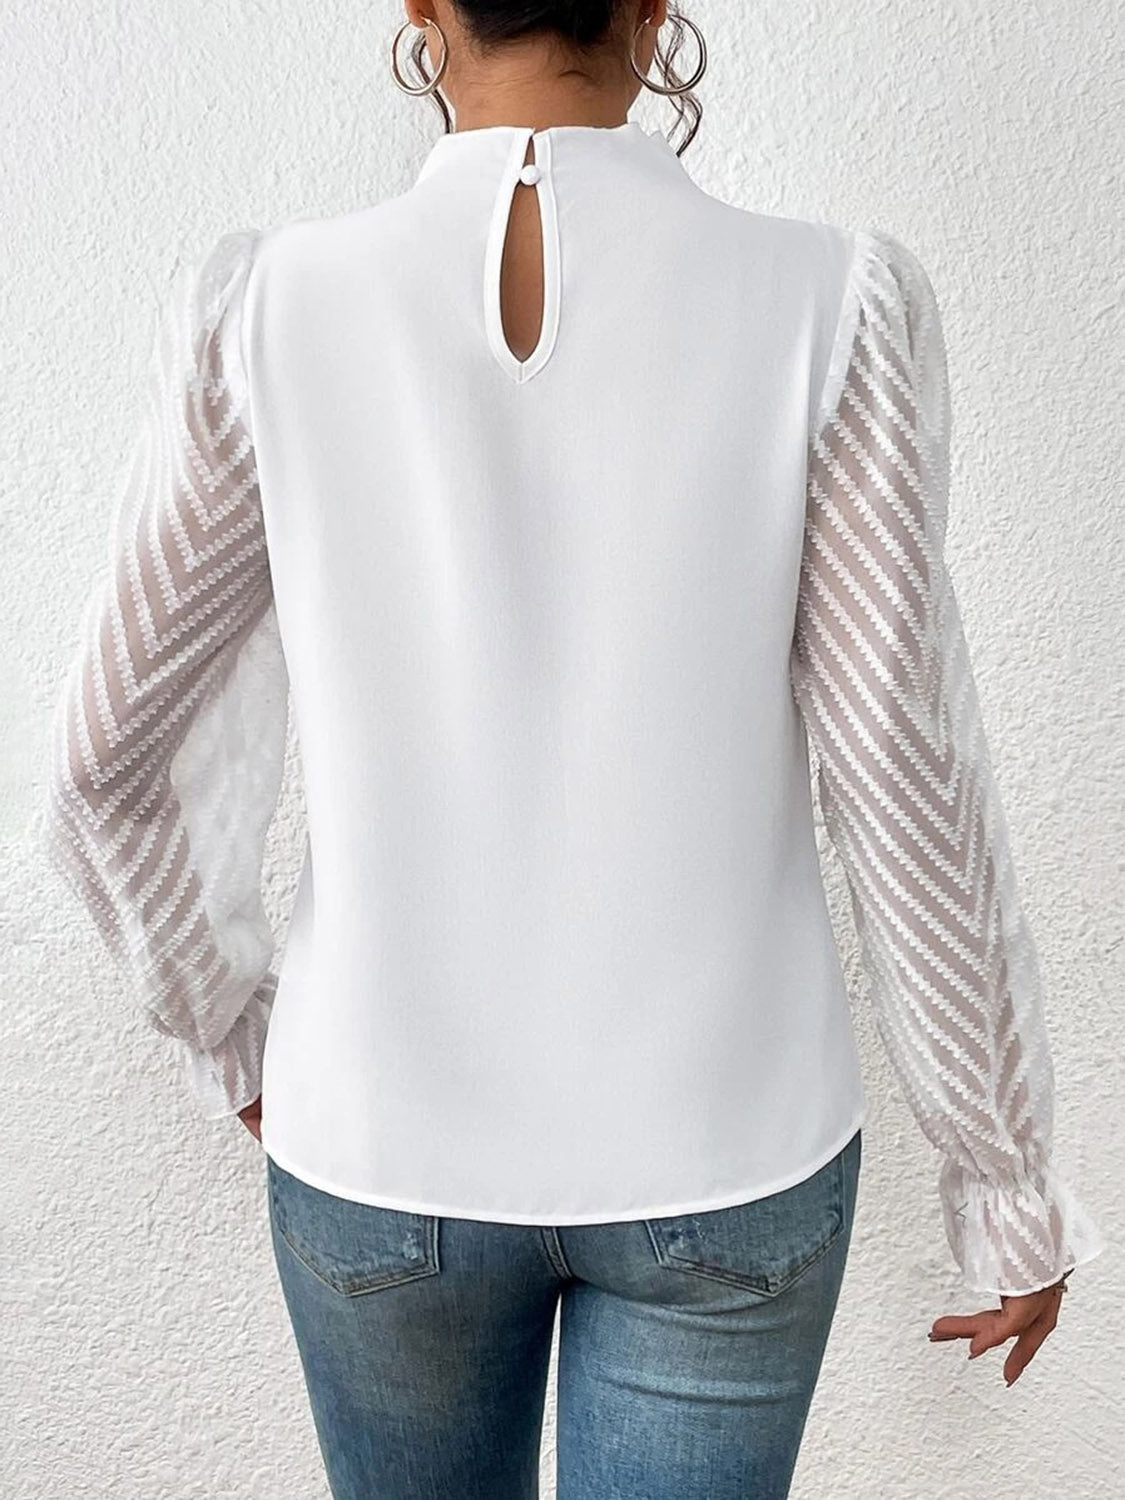 Beautiful Mock Neck Blouse with Mesh Design Sleeves